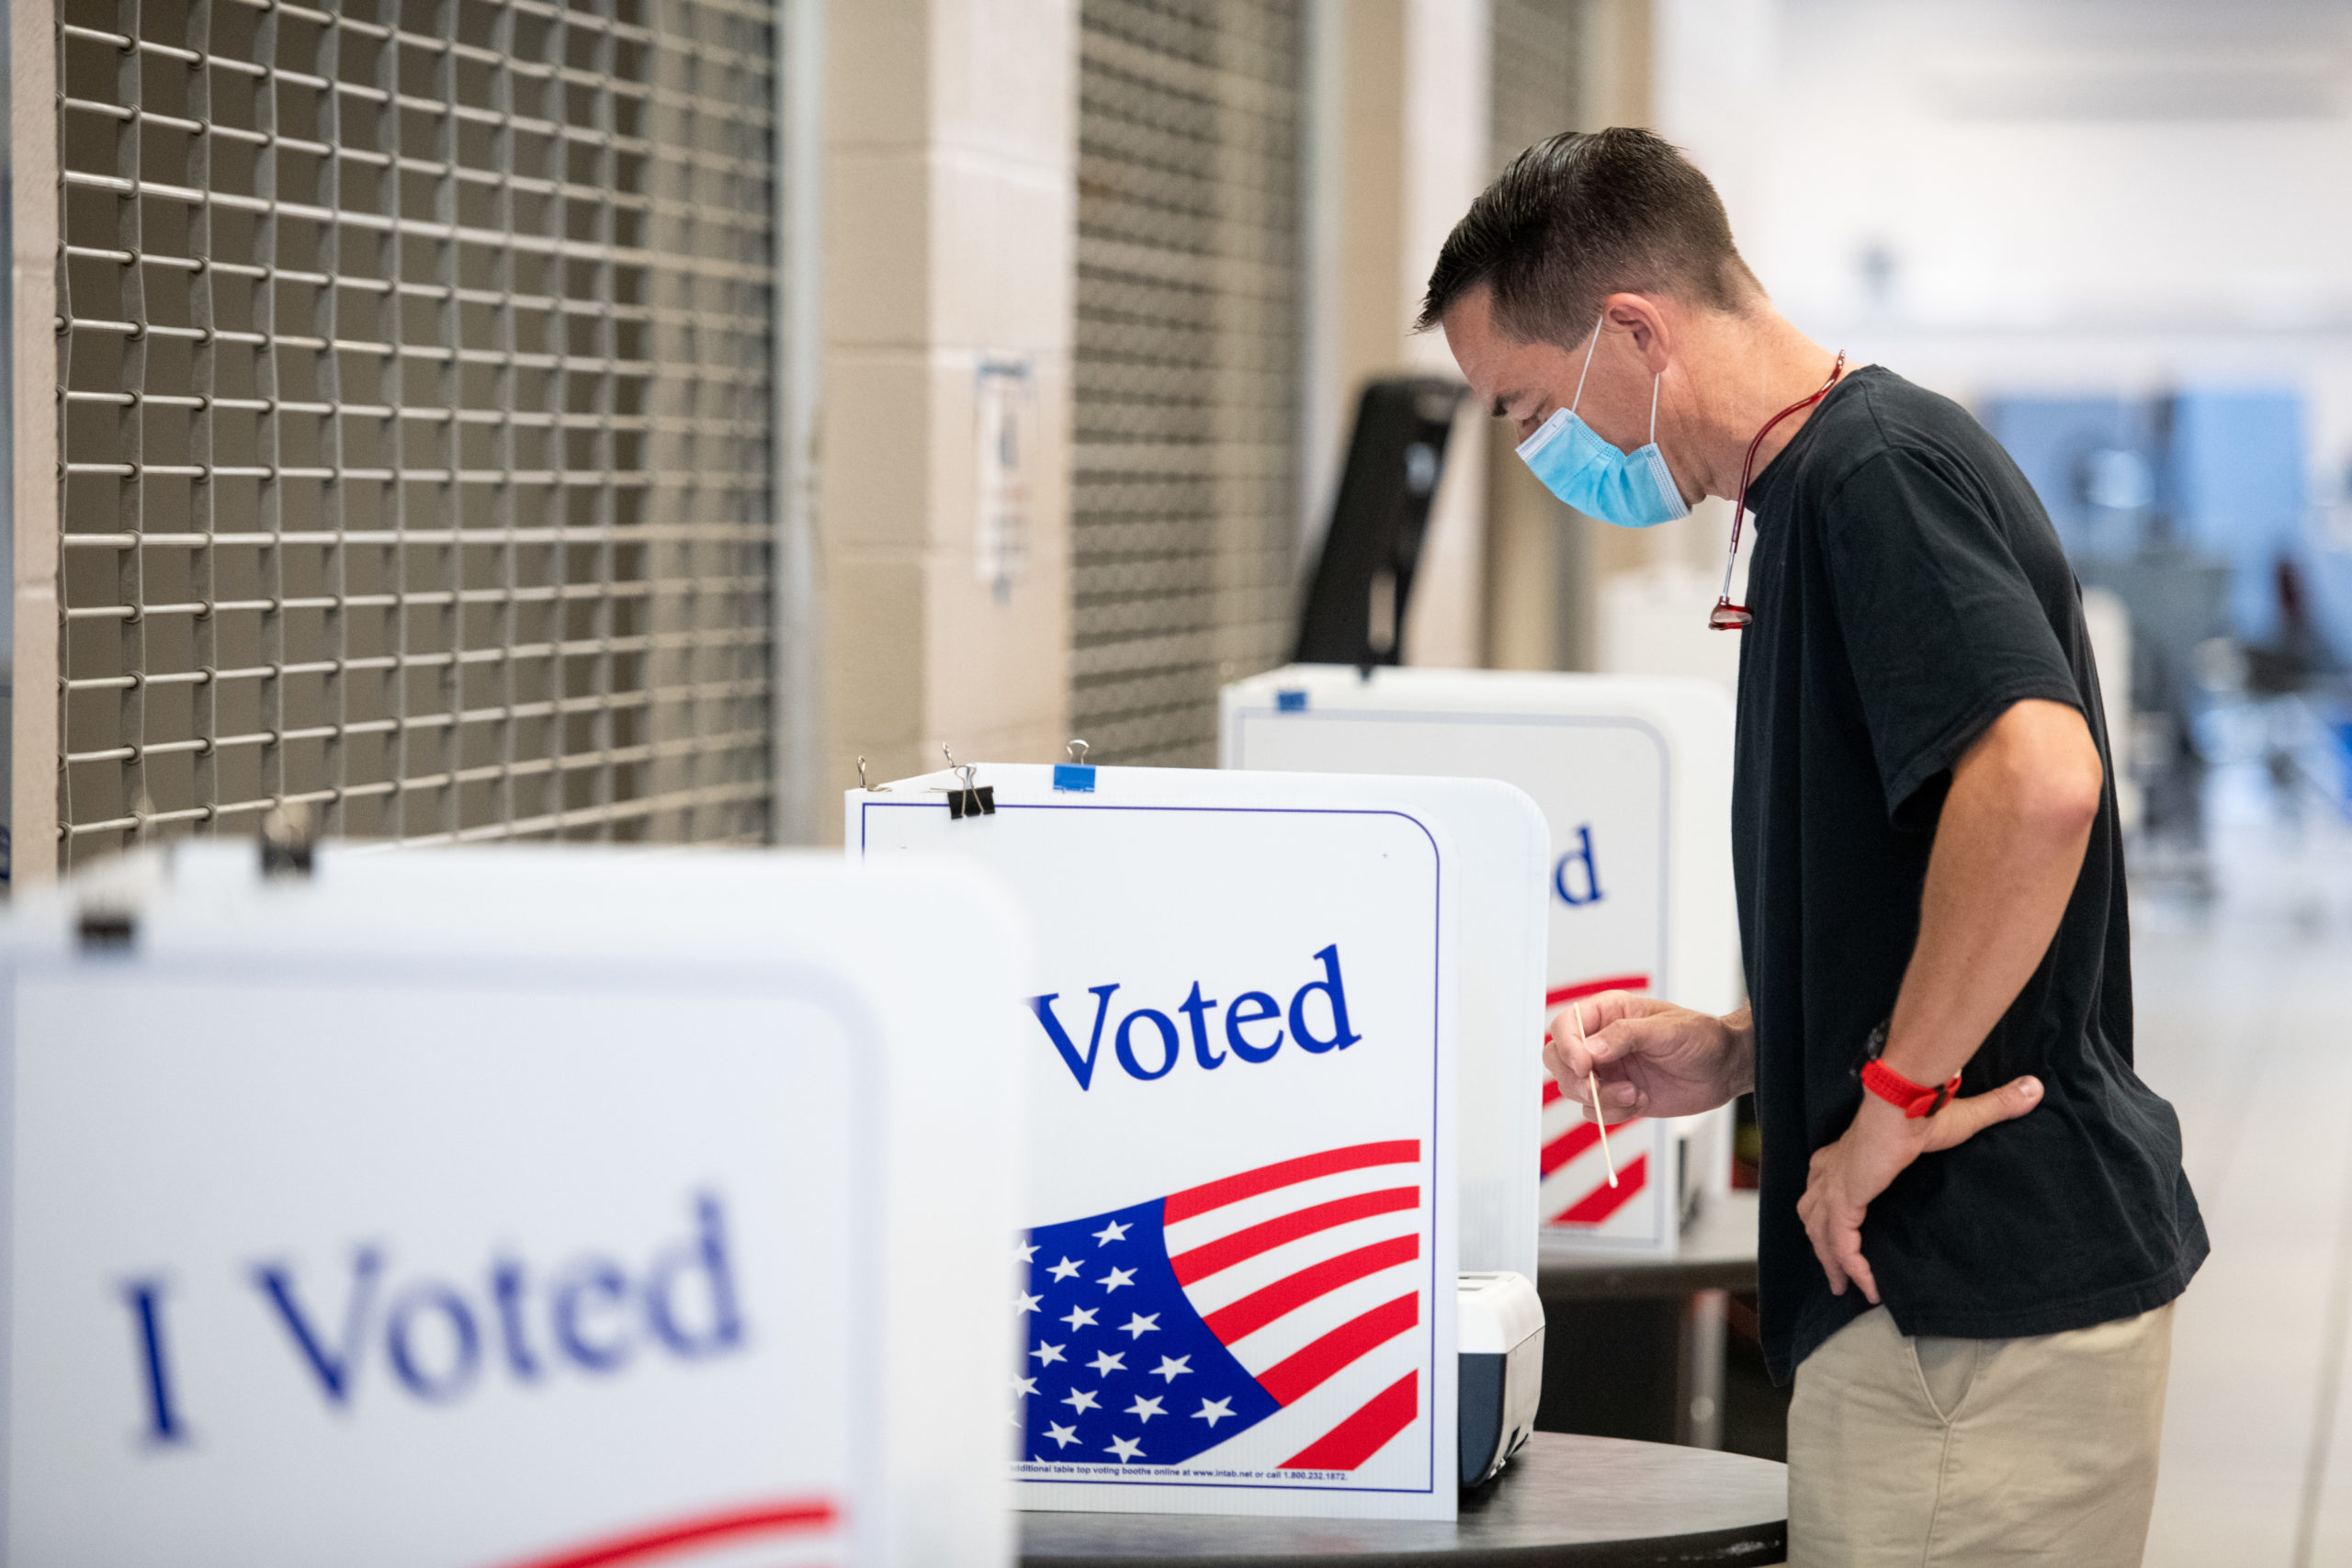 John Sherer casts a vote using a swab at Dreher High School on June 9, 2020 in Columbia, South Carolina. Georgia, Nevada, North Dakota, South Carolina and West Virginia hold primaries today. (Photo by Sean Rayford/Getty Images)